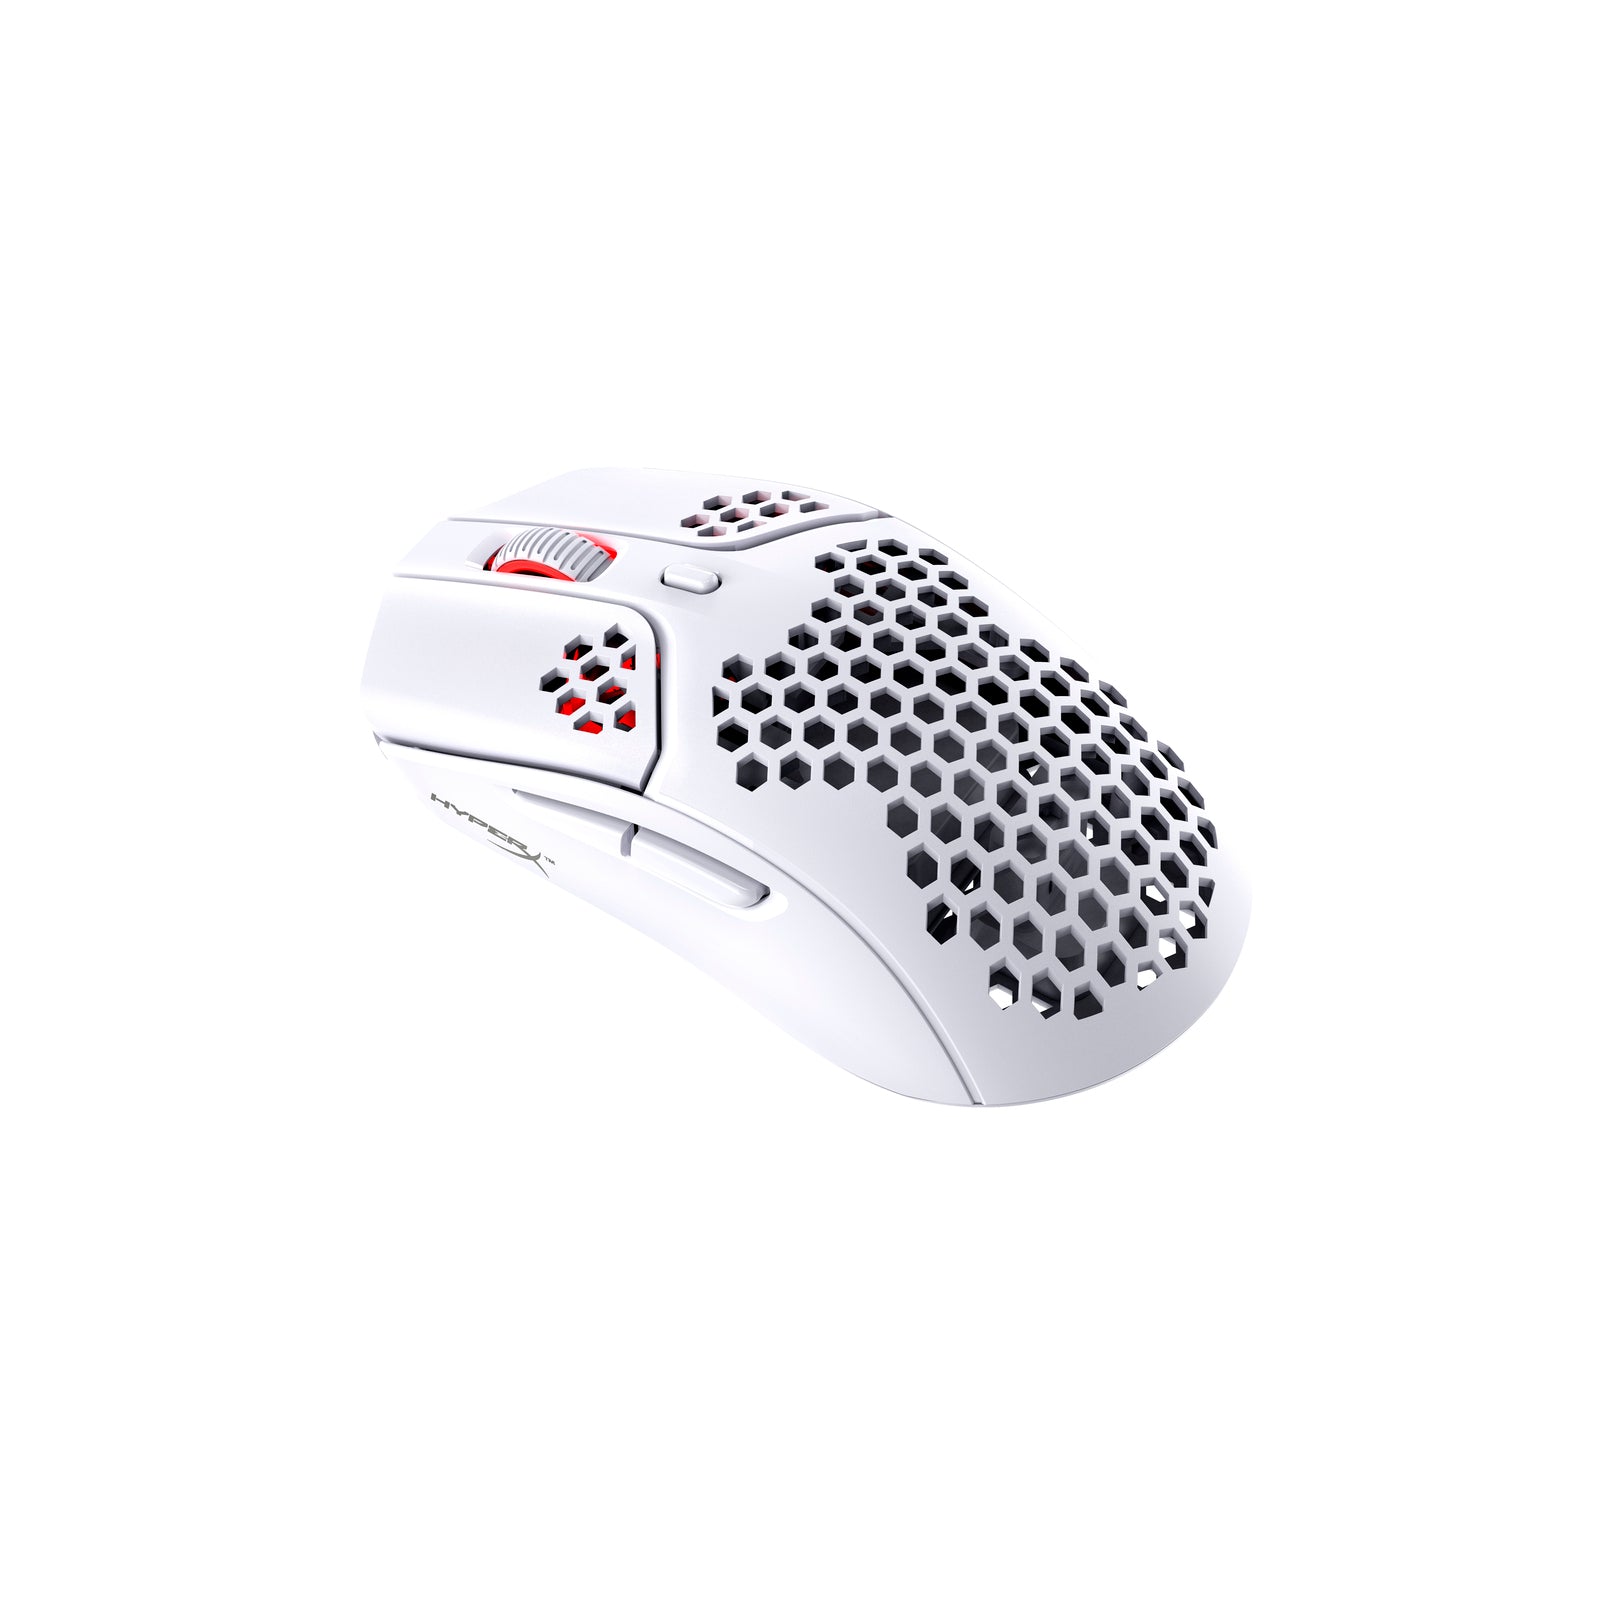 HyperX Pulsefire Haste Wireless White gaming mouse, pointing left - up, view from above